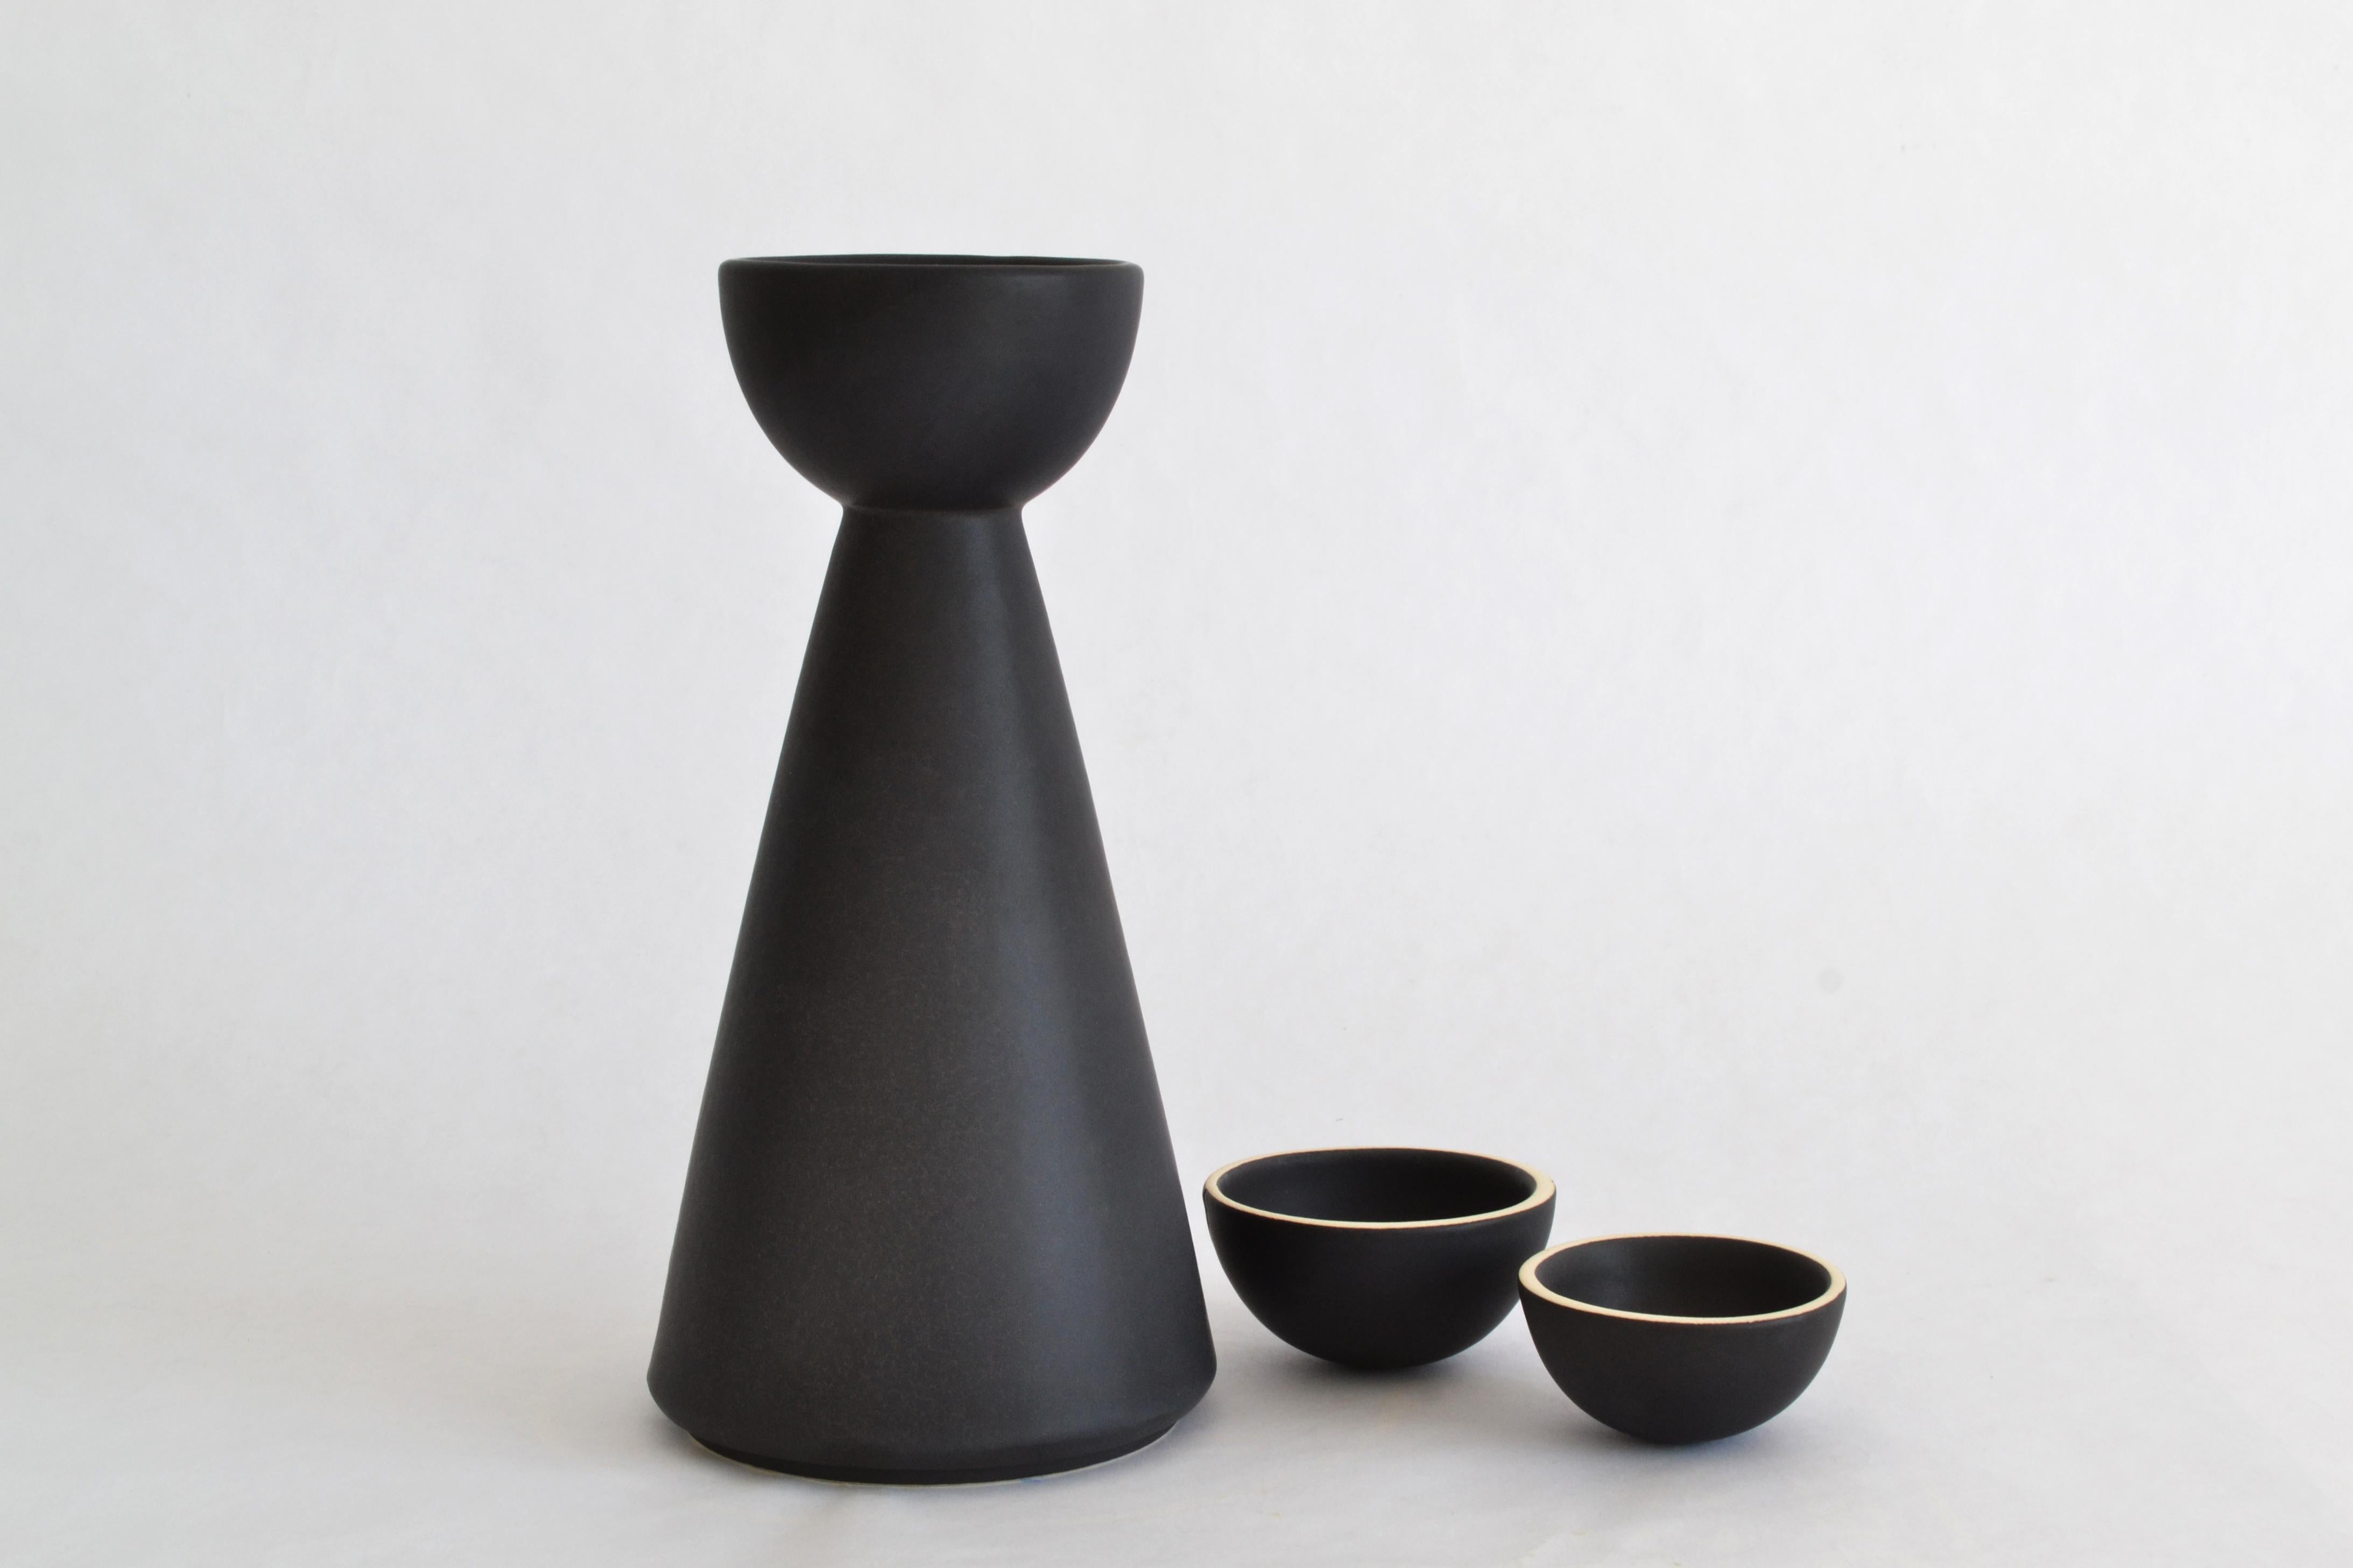 Glazed BLACK Carafe Contemporary Inspired by Traditional Jug Pitcher for Mezcal For Sale